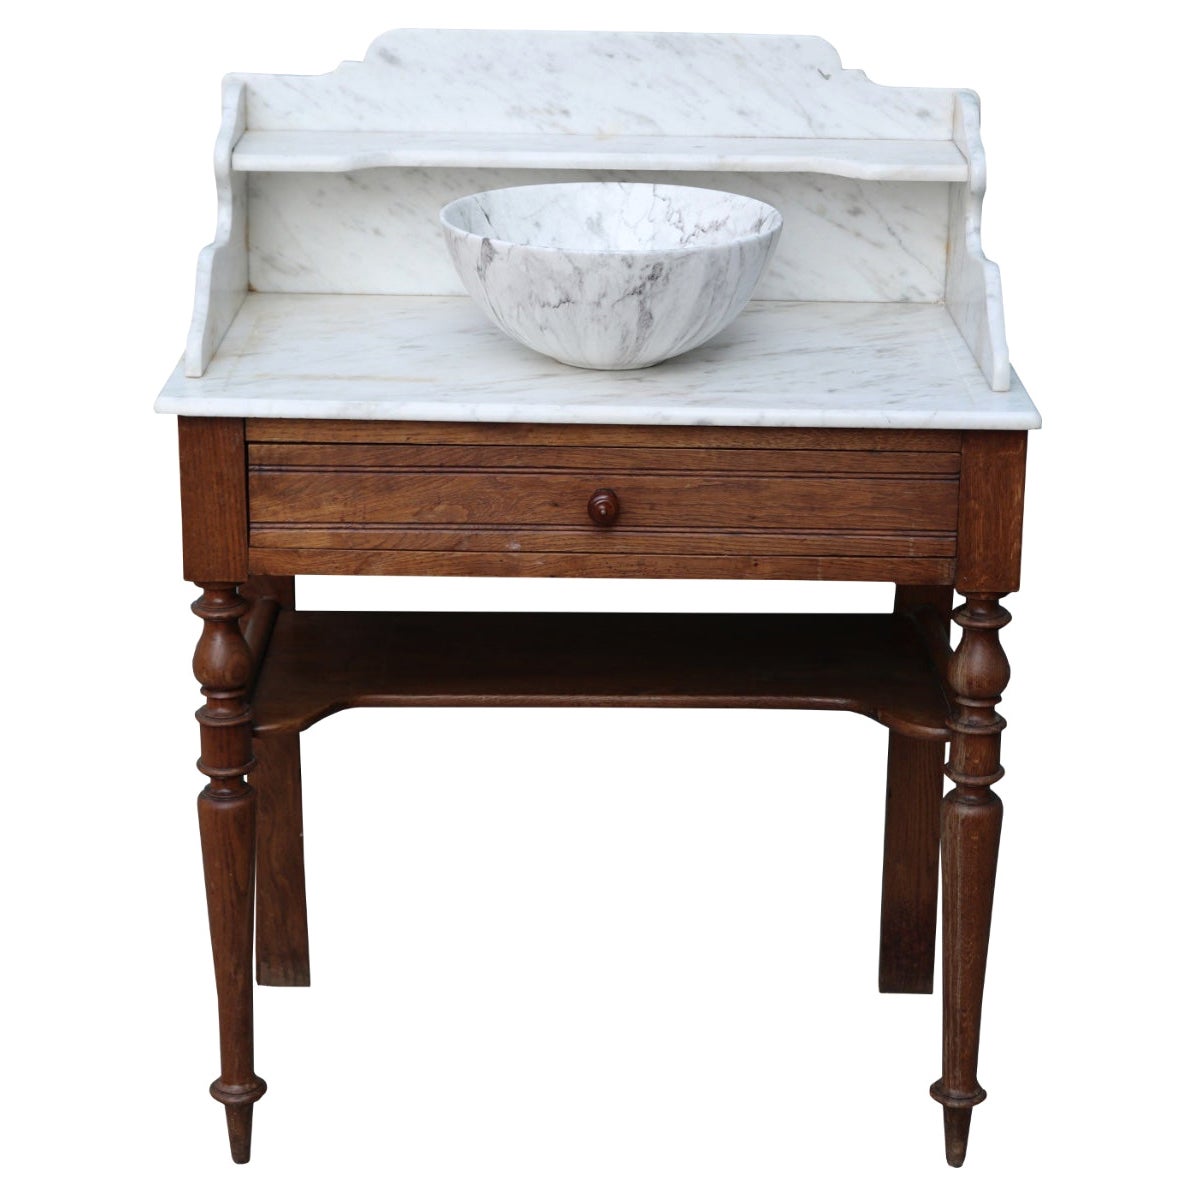 Antique Marble and Oak Wash Basin and Stand